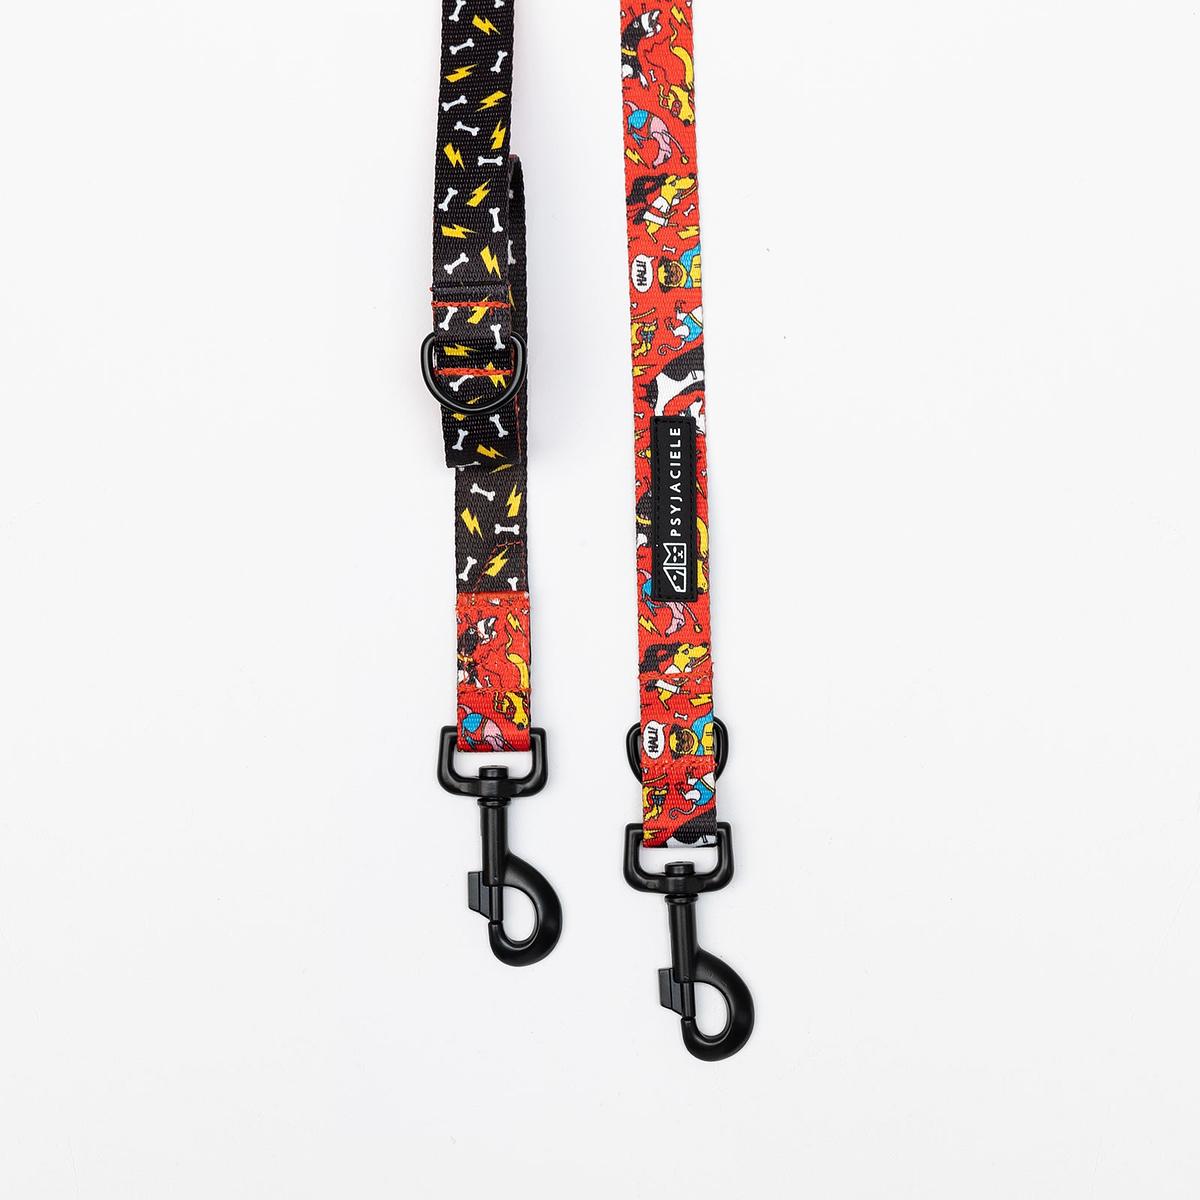 Adjustable leash "Woof for the better world" 